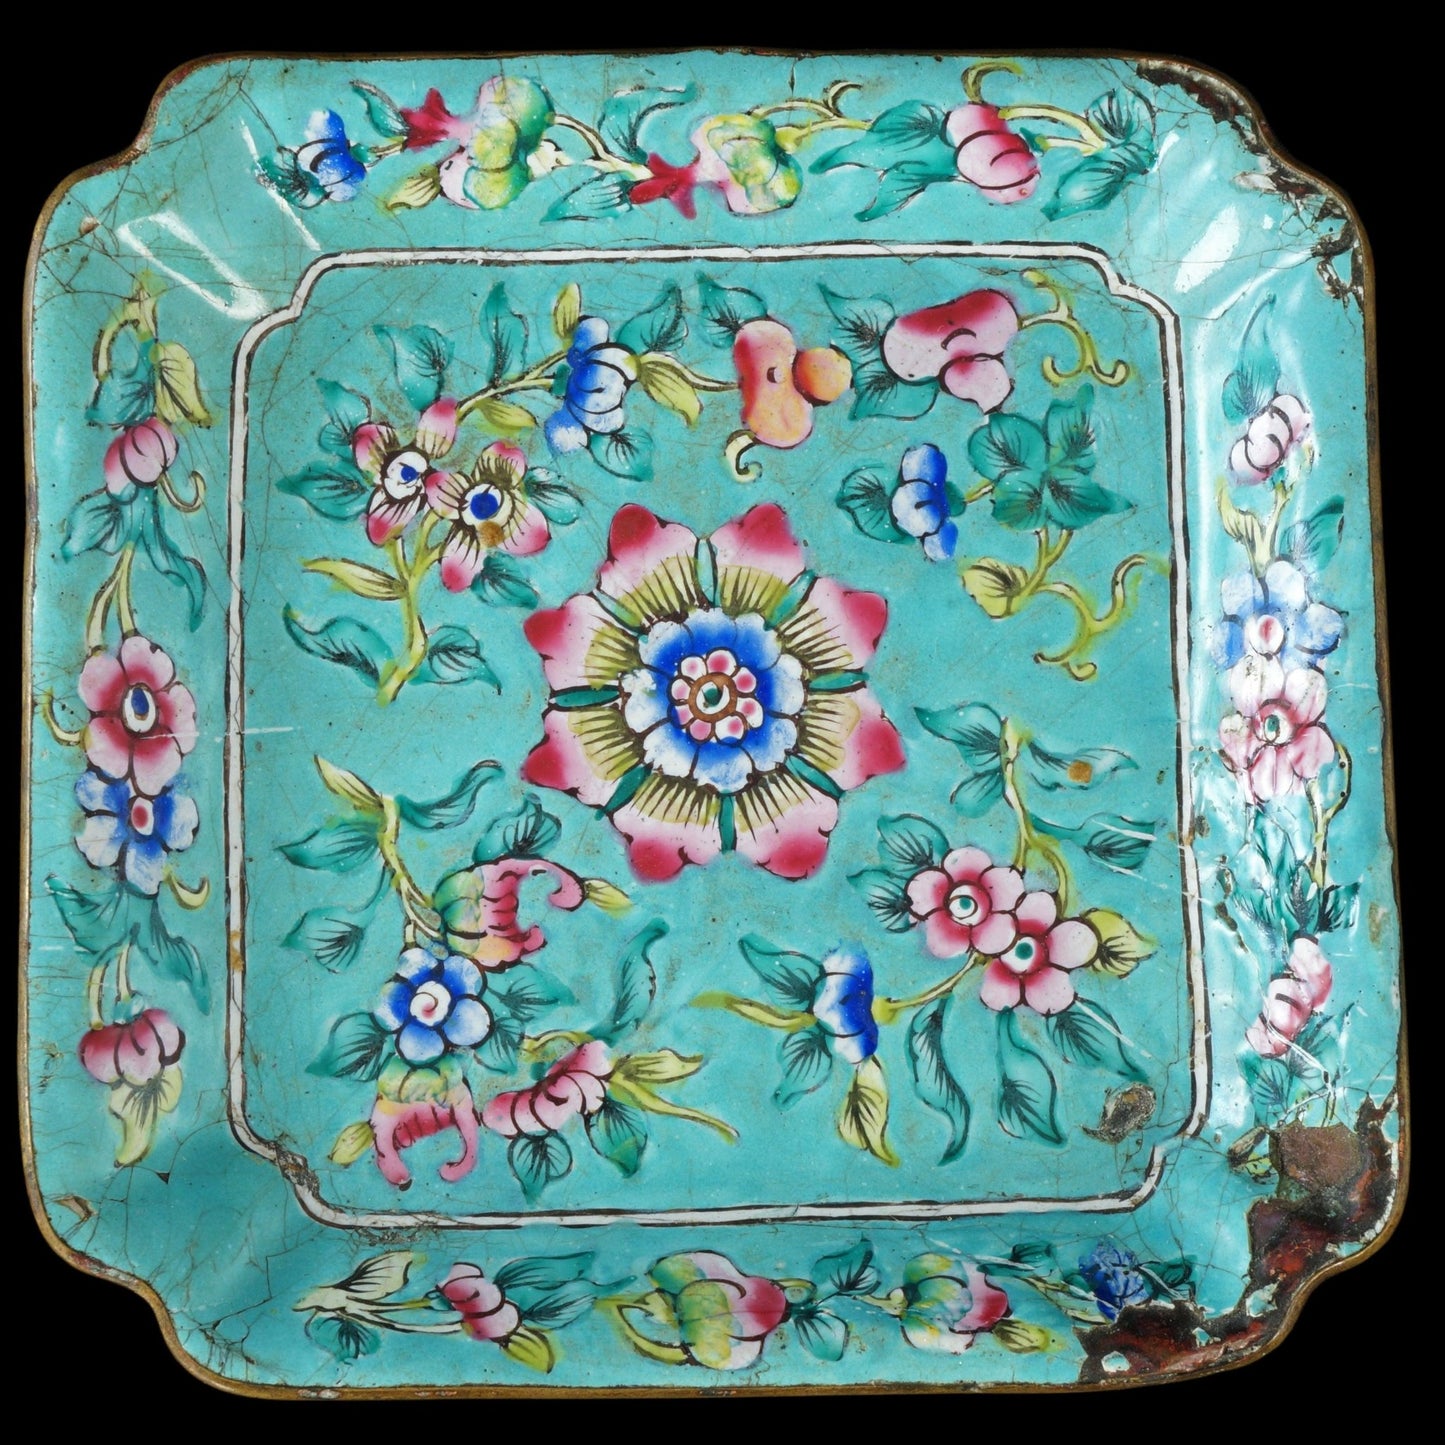 Chinese Enamel on Copper Tray 19th Century - Bear and Raven Antiques